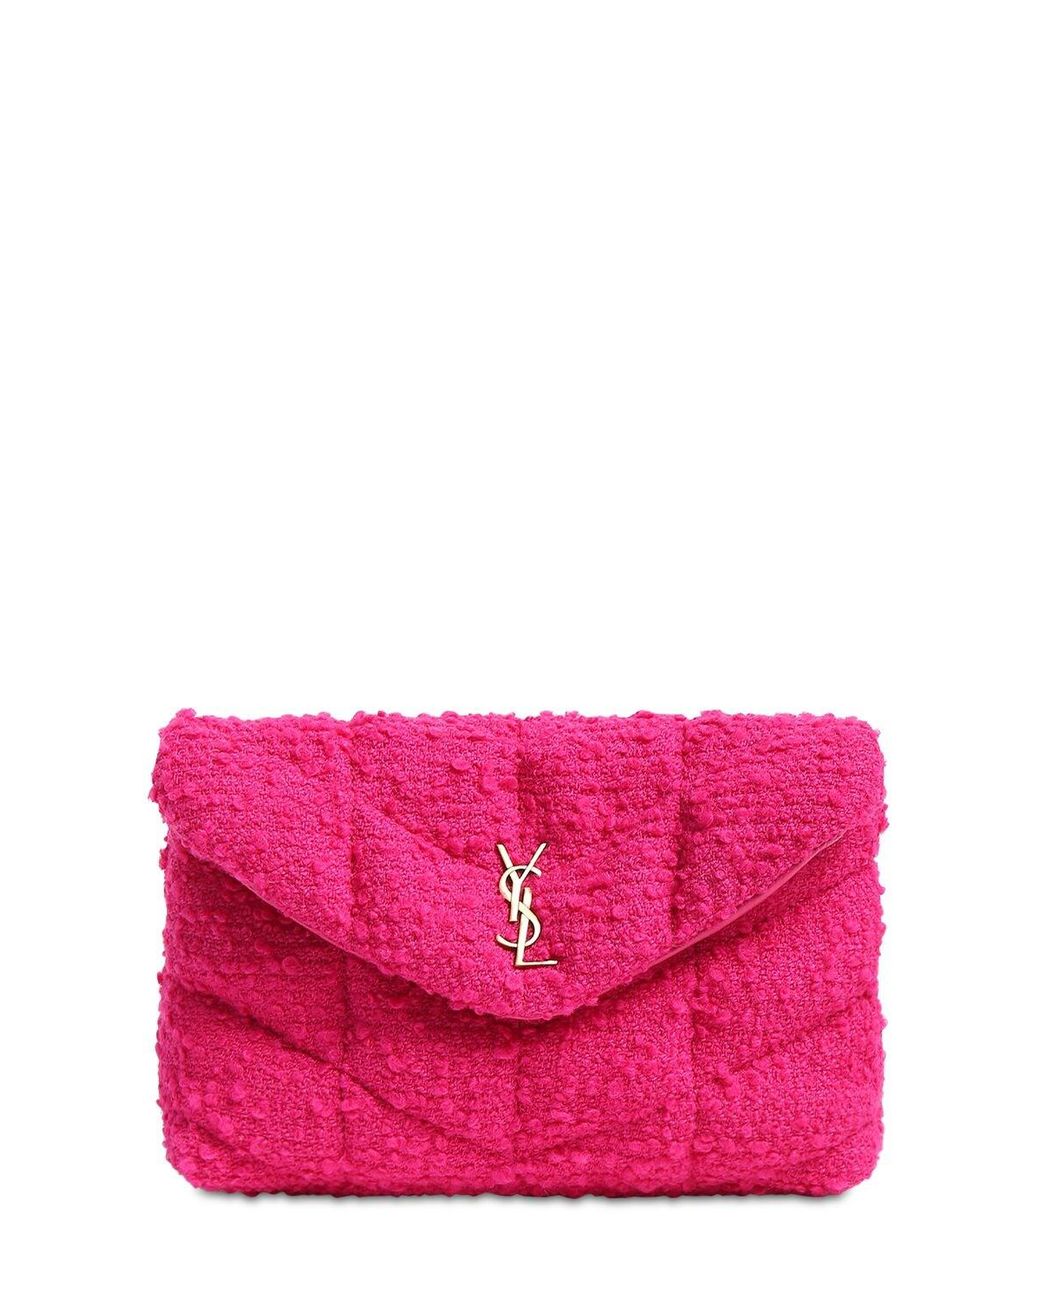 Saint Laurent Loulou Small Puffy Tweed Pouch in Magenta (Pink) | Lyst ...